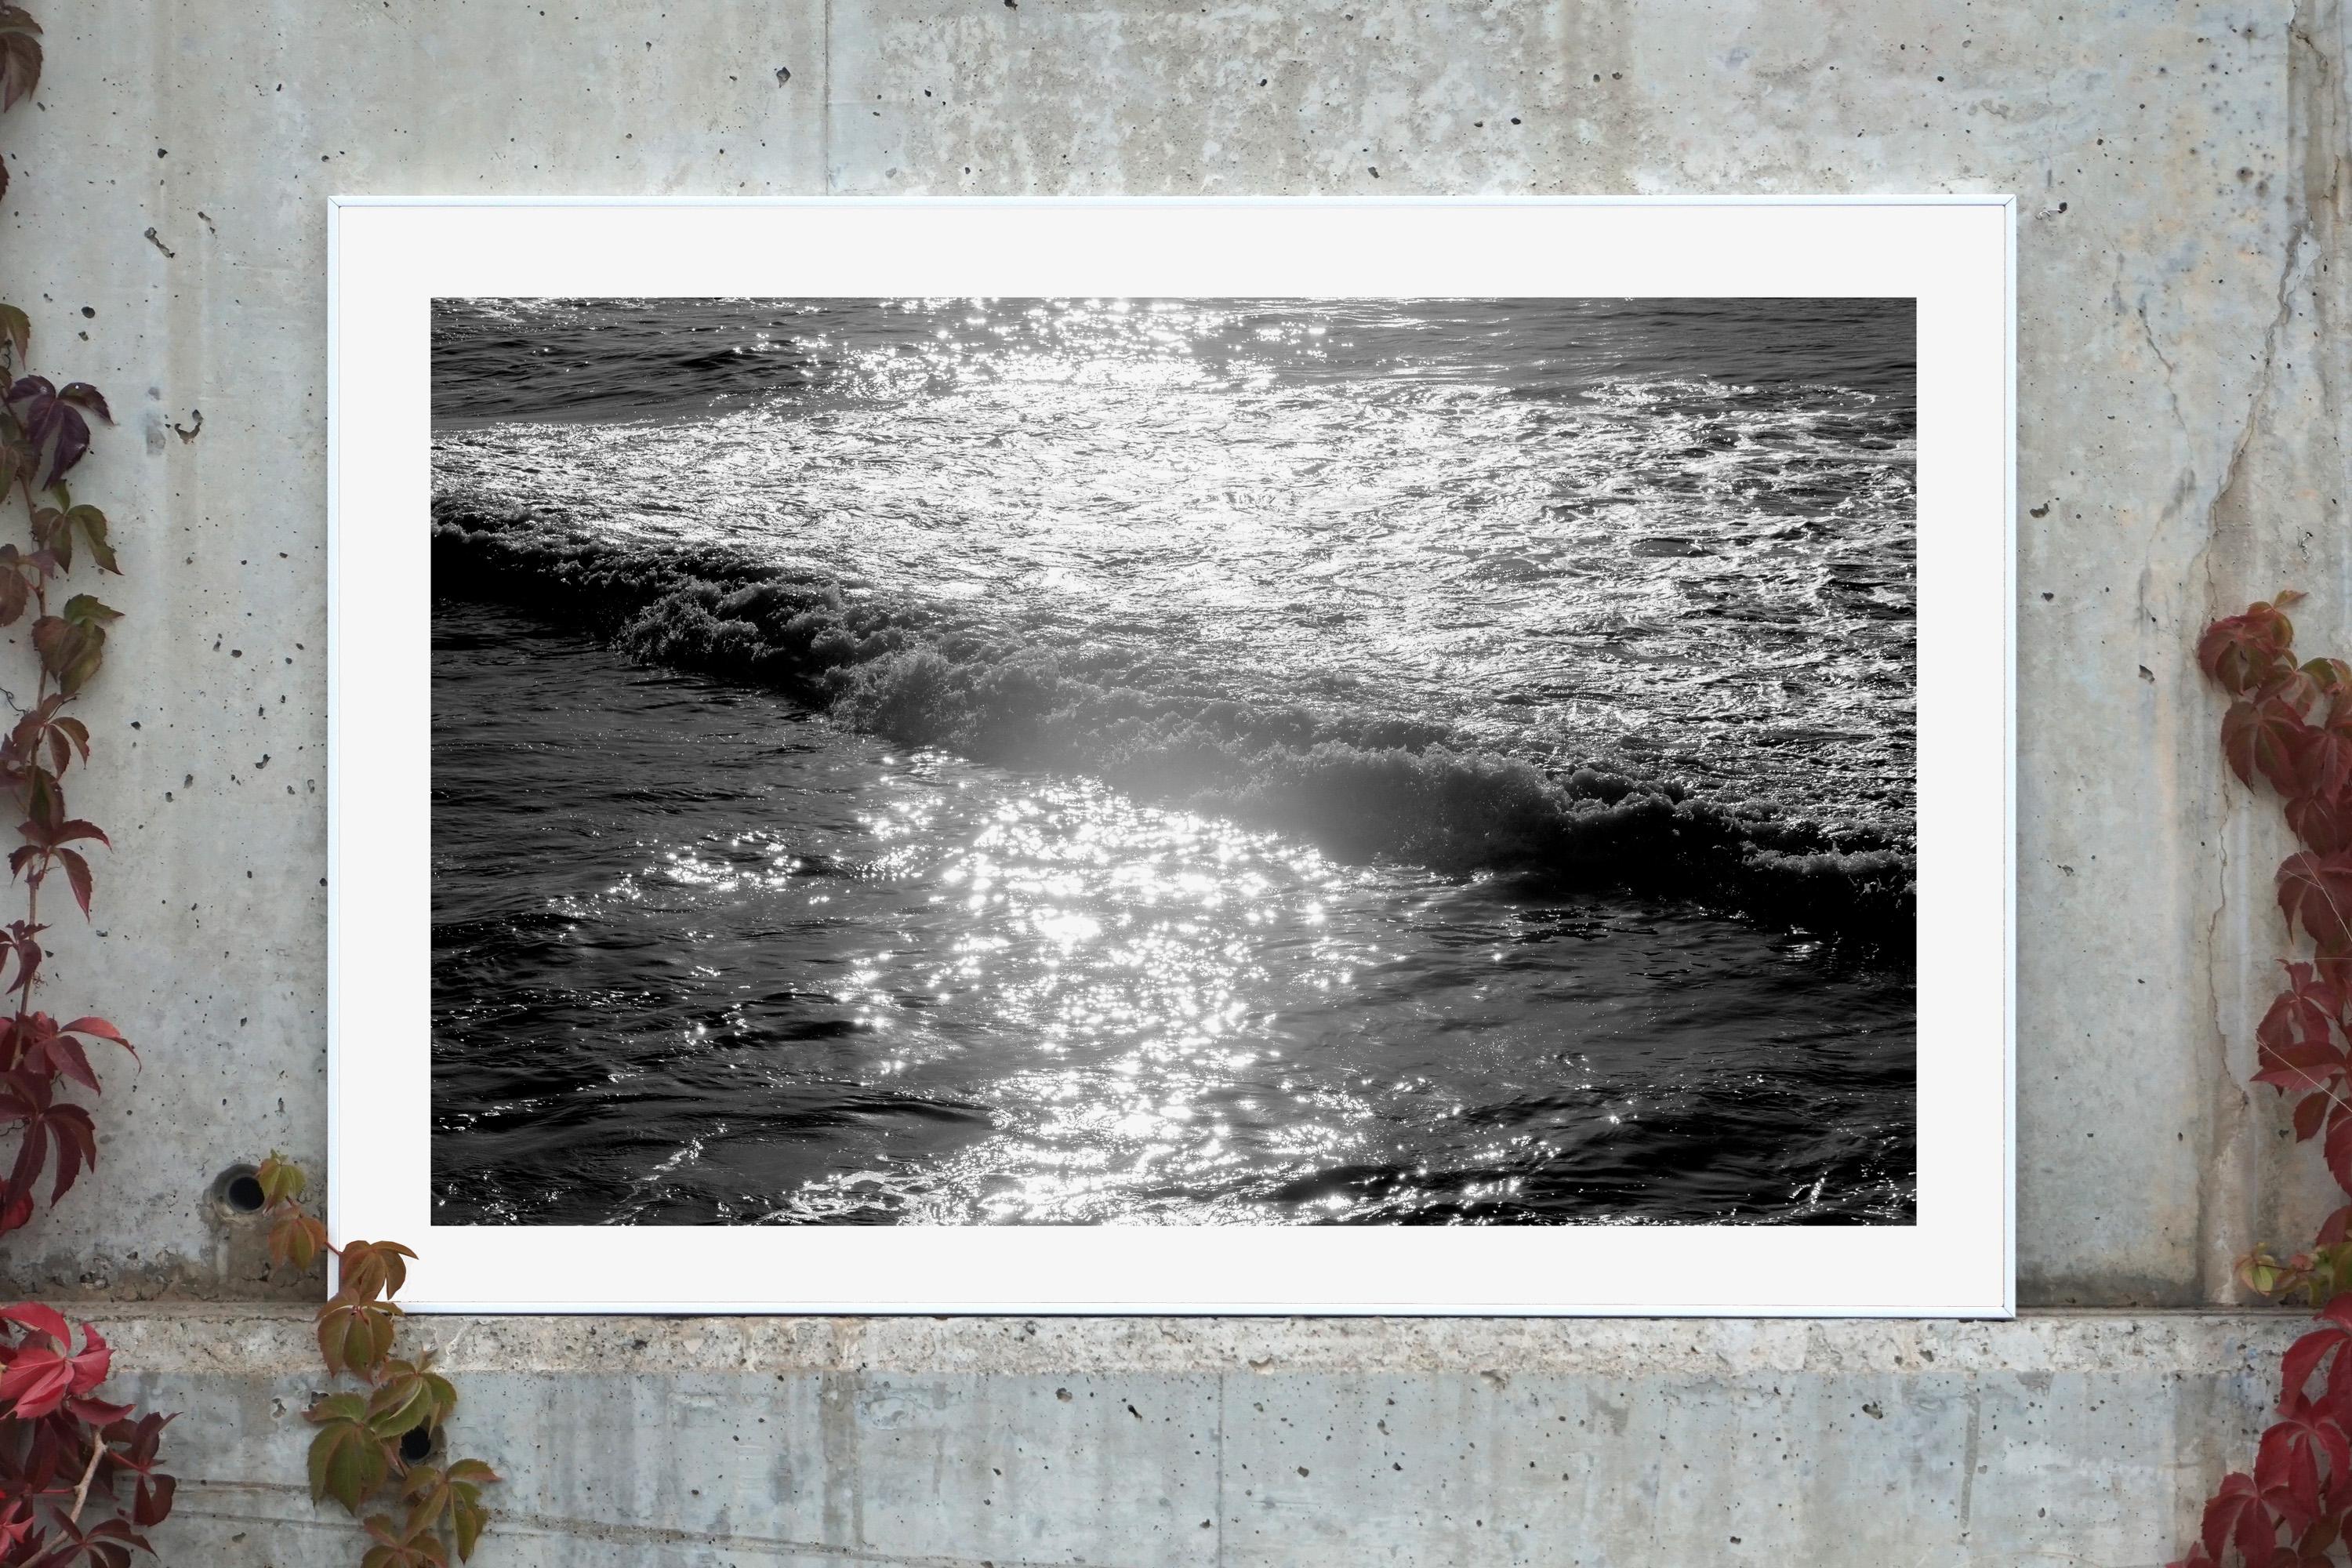 Water Reflection, Seascape Black and White Giclée Print, Pacific Sunset Waves - Realist Photograph by Kind of Cyan